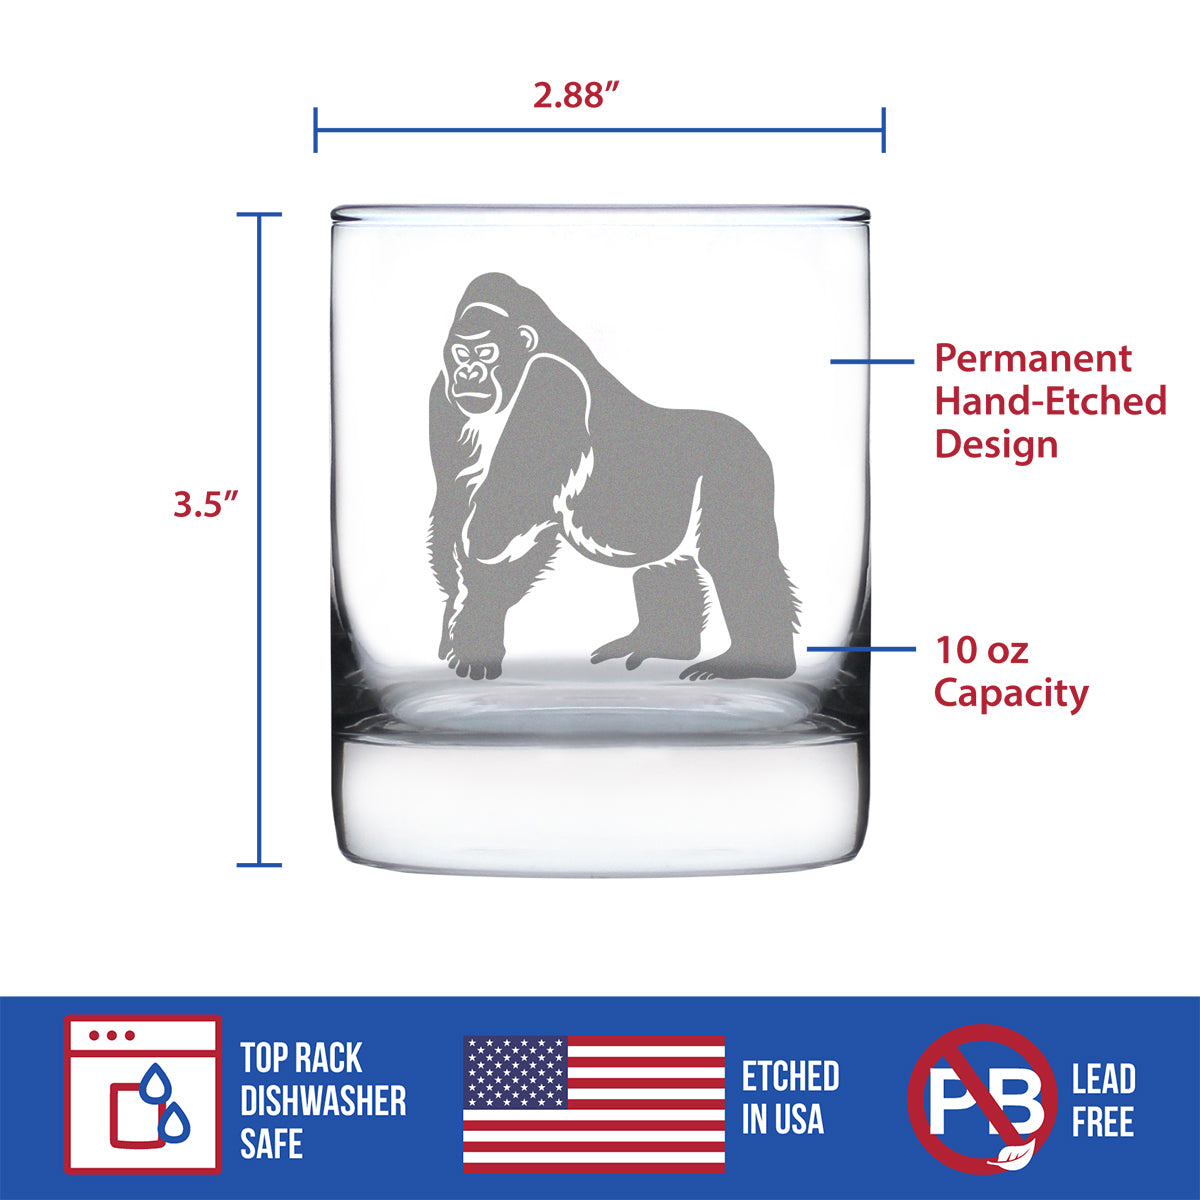 Gorilla Rocks Glass - Fun Wild Animal Themed Decor and Gifts for Lover -  bevvee